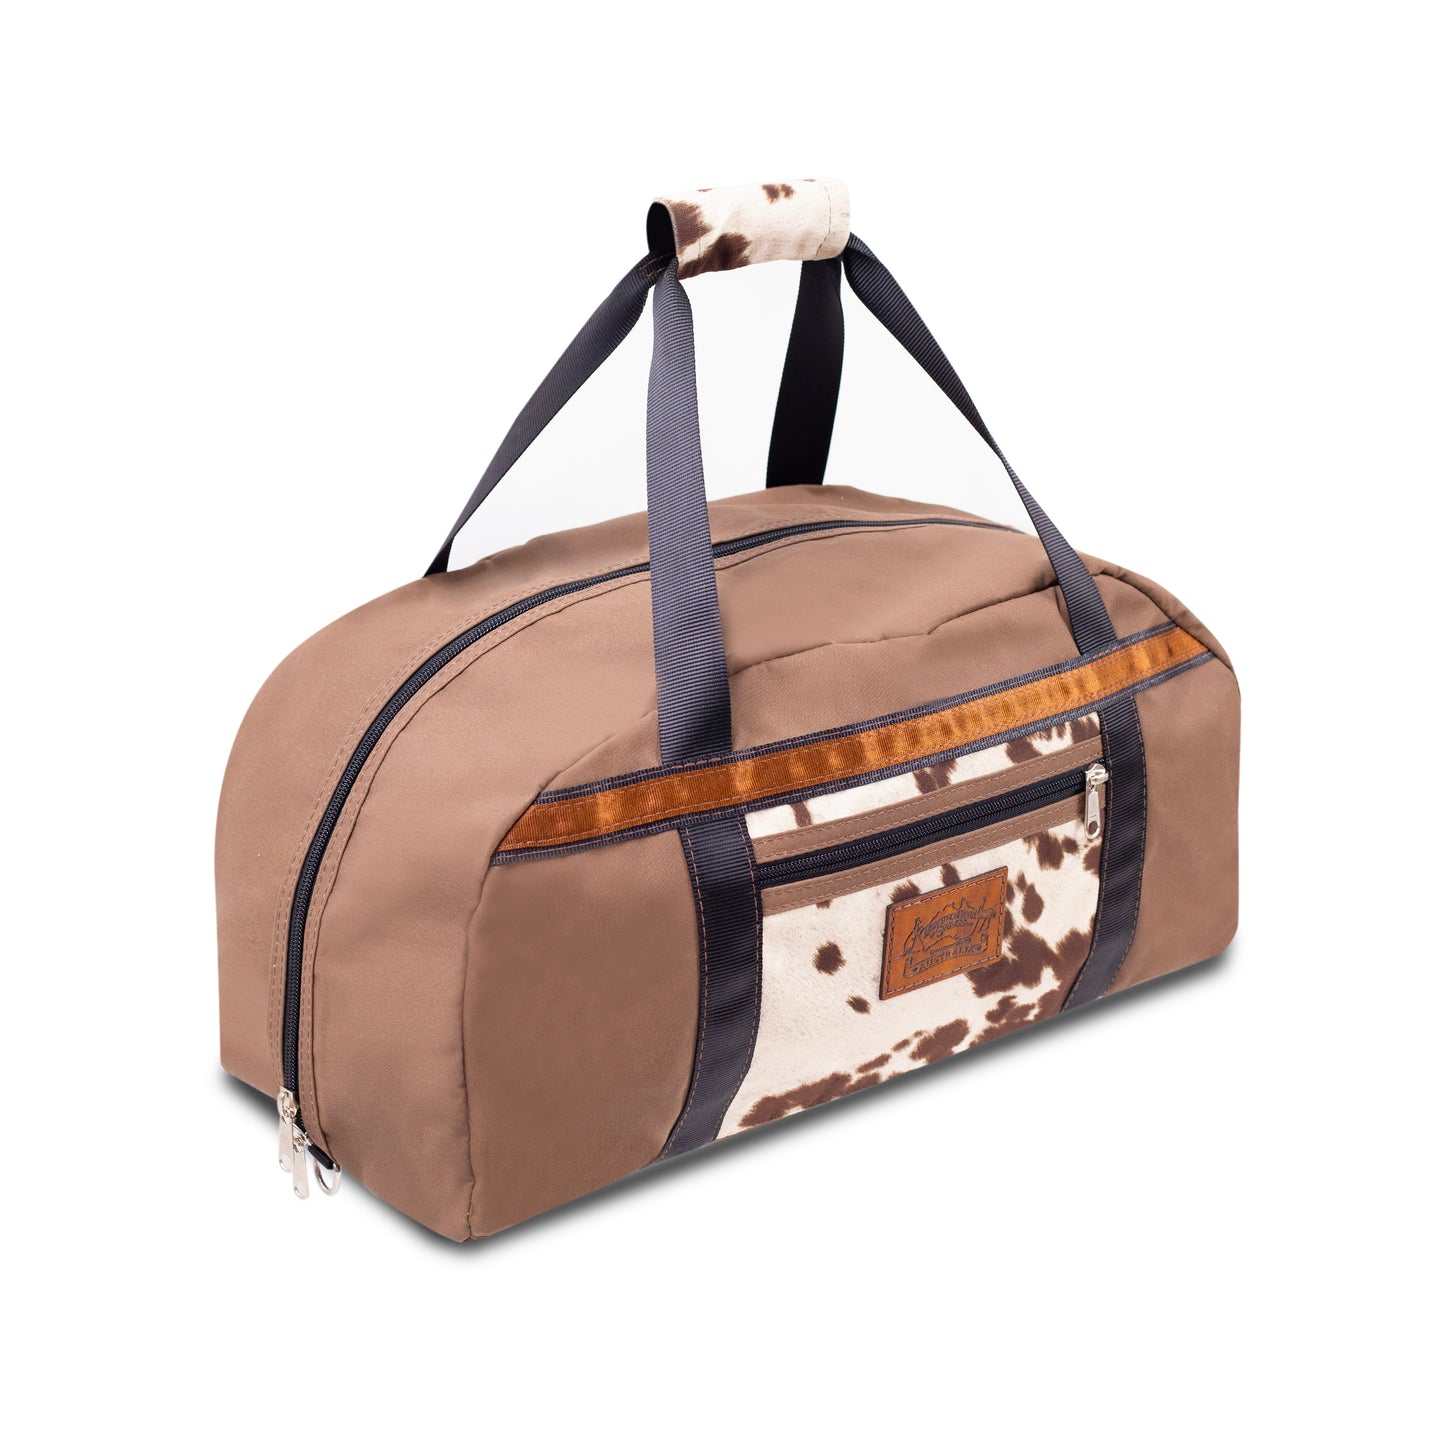 Antelope Brown Overnight Canvas Bag with limited edition cow print fabric.